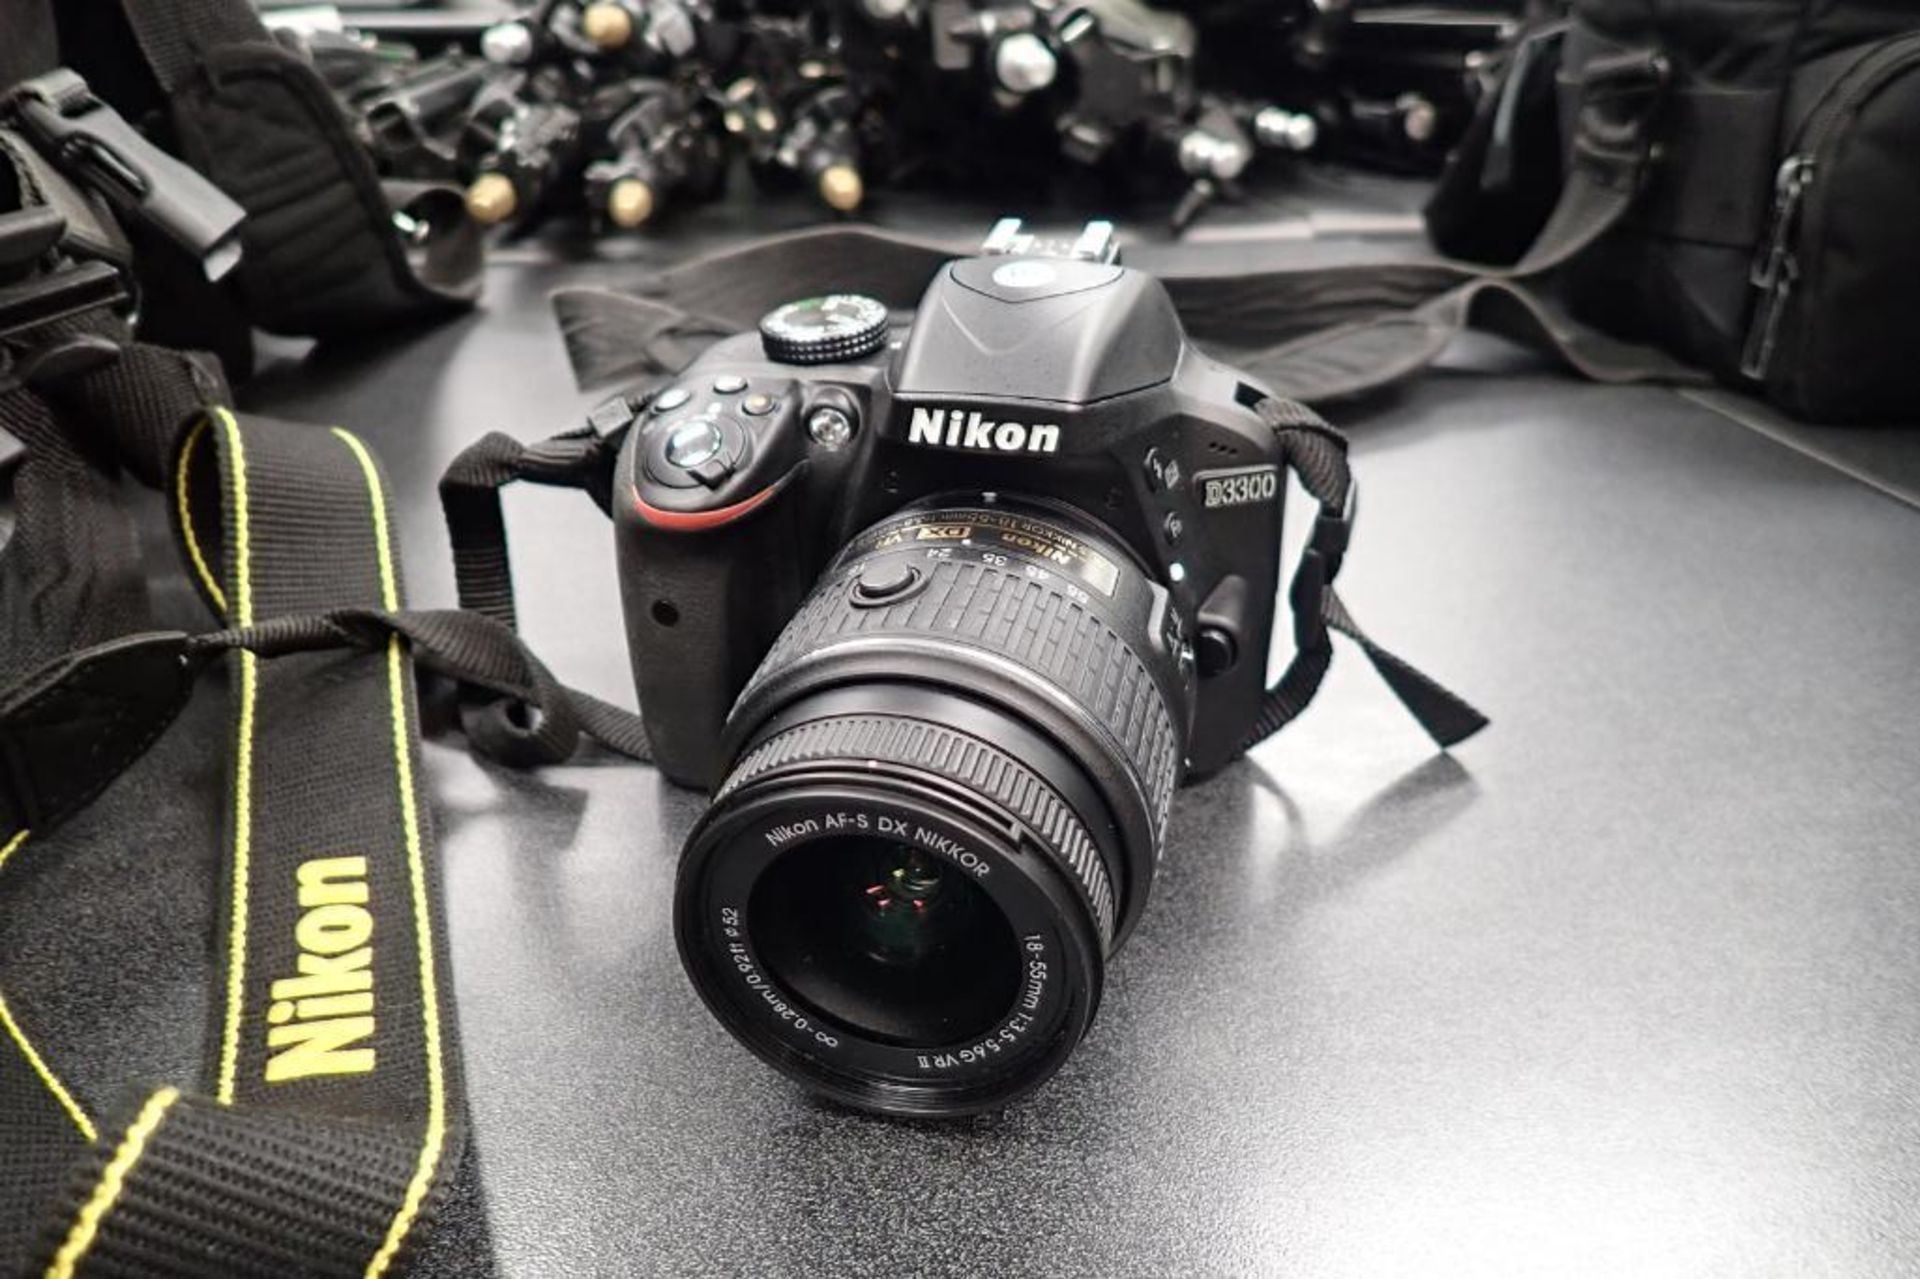 Nikon D3300 professional camera with case - Image 2 of 7